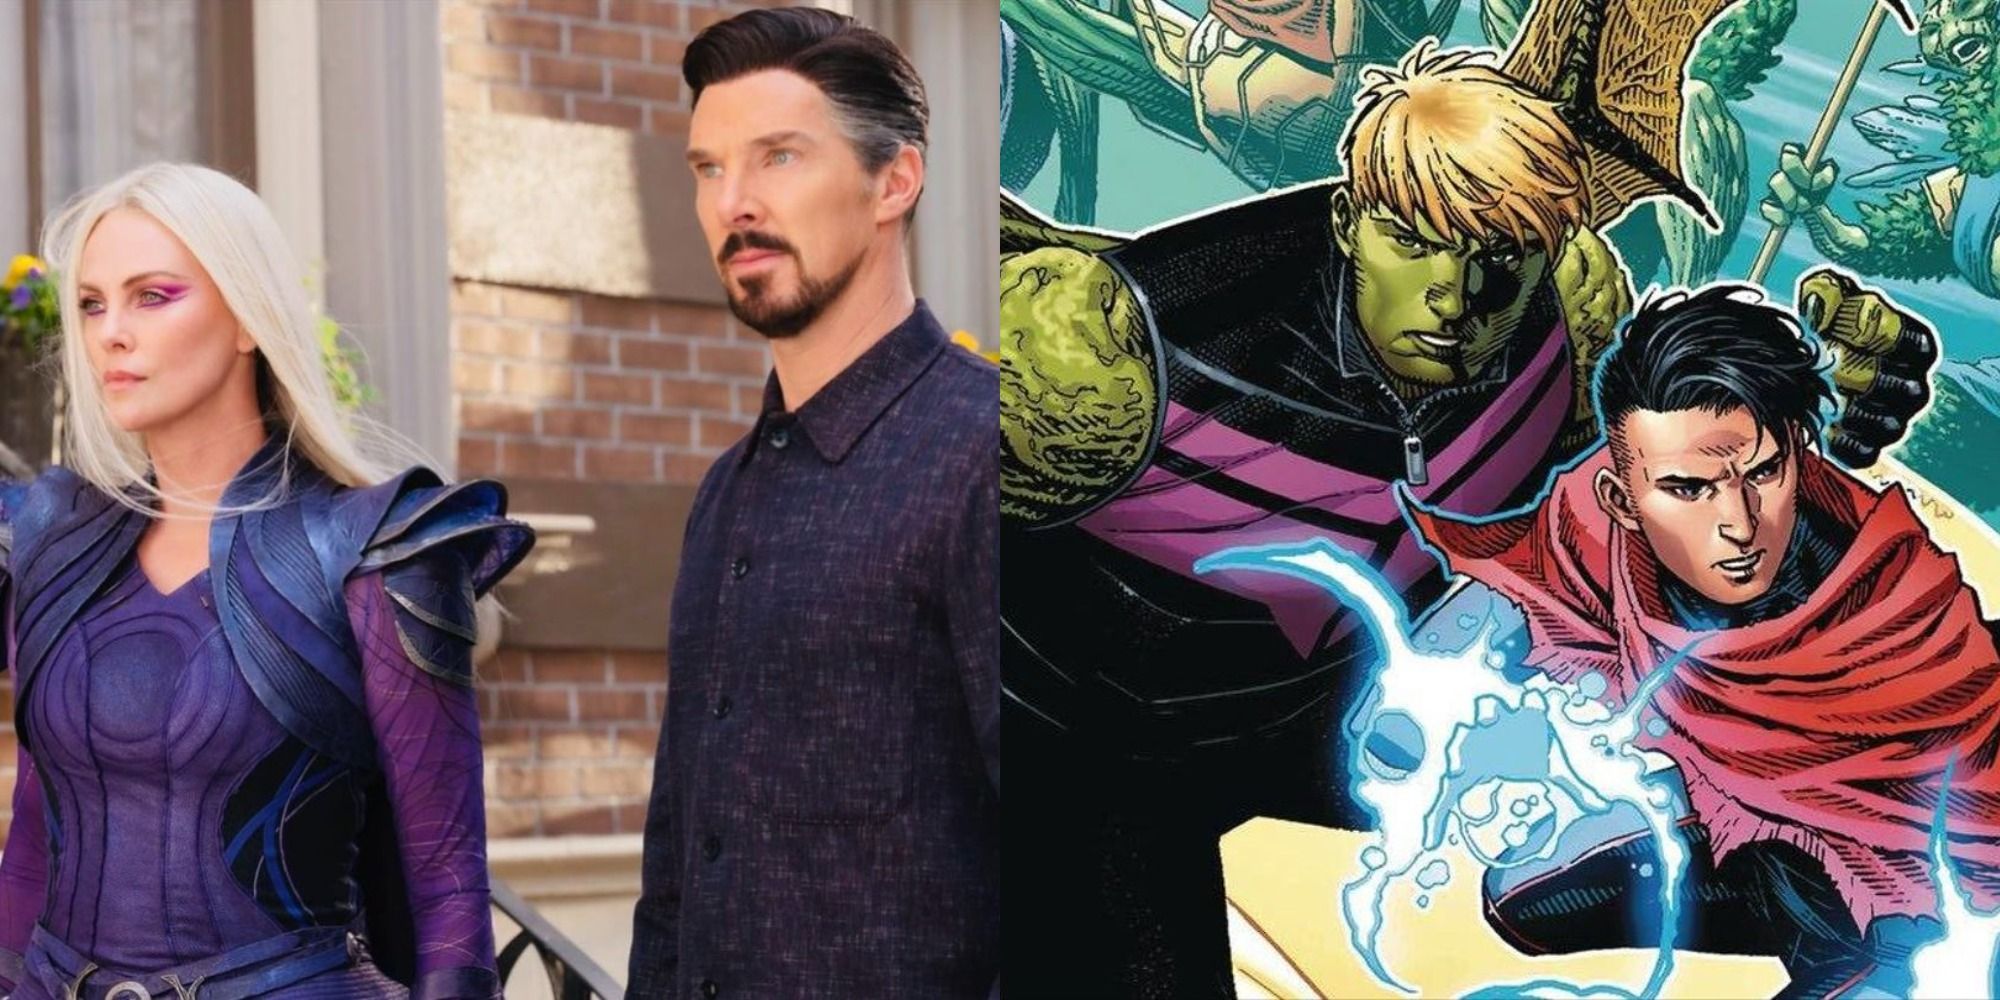 Split image showing Clea and Doctor Strange in MoM, and Hulkling and Wiccan in the comics.